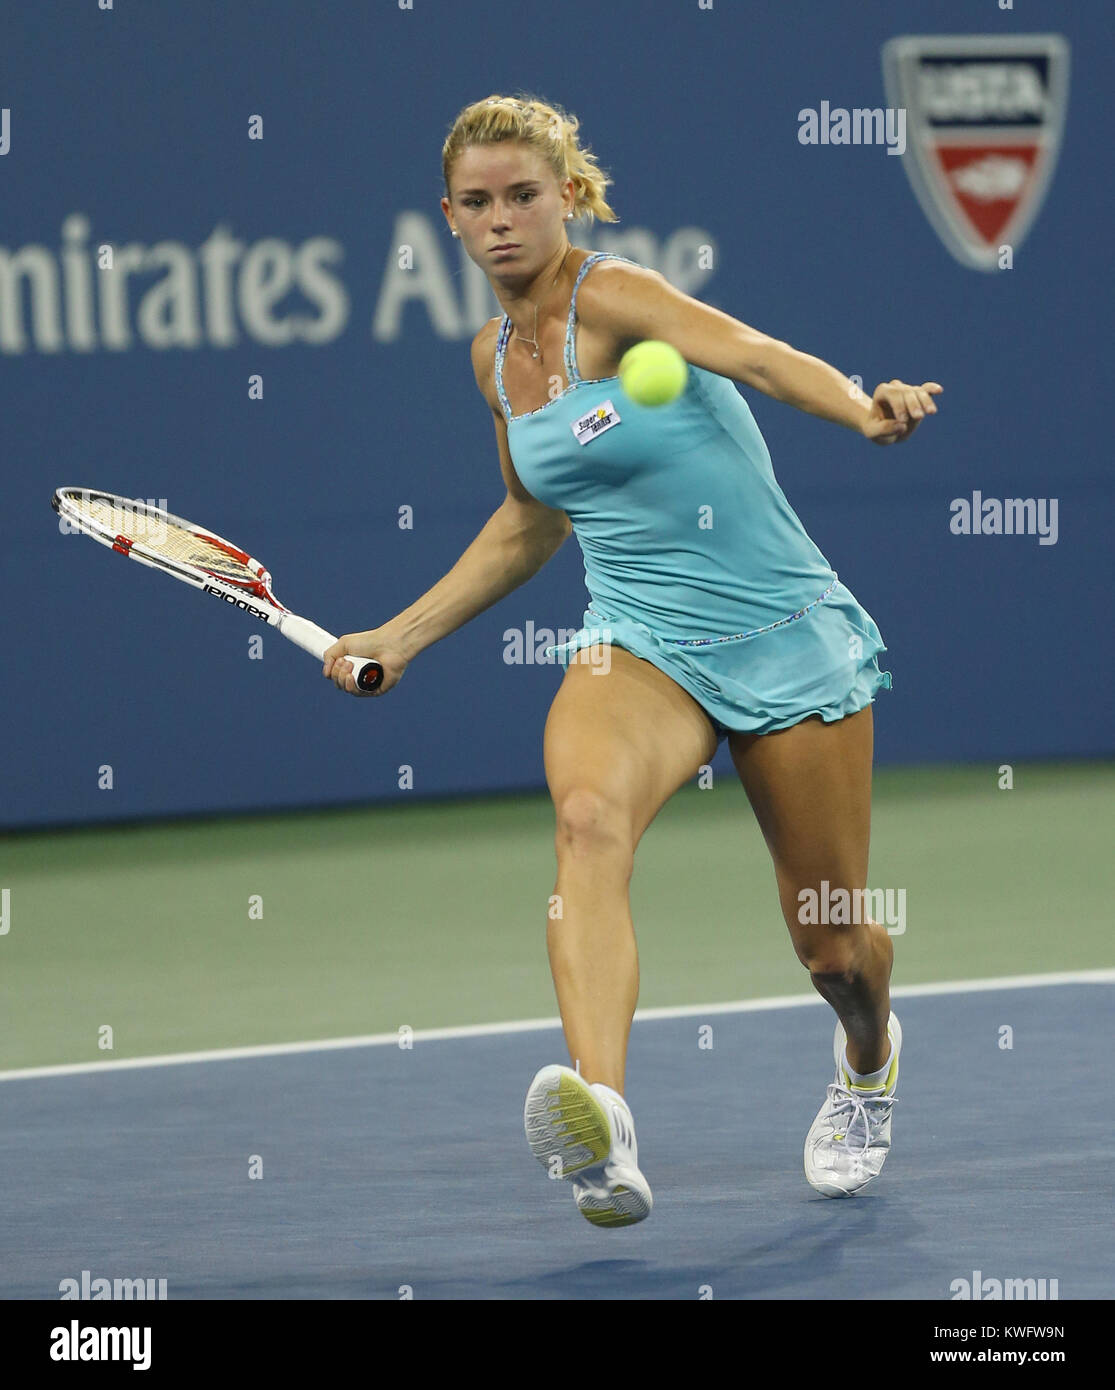 FLUSHING, NY - AUGUST 31: Camila Giorgi Day Six of the 2013 US Open at ...